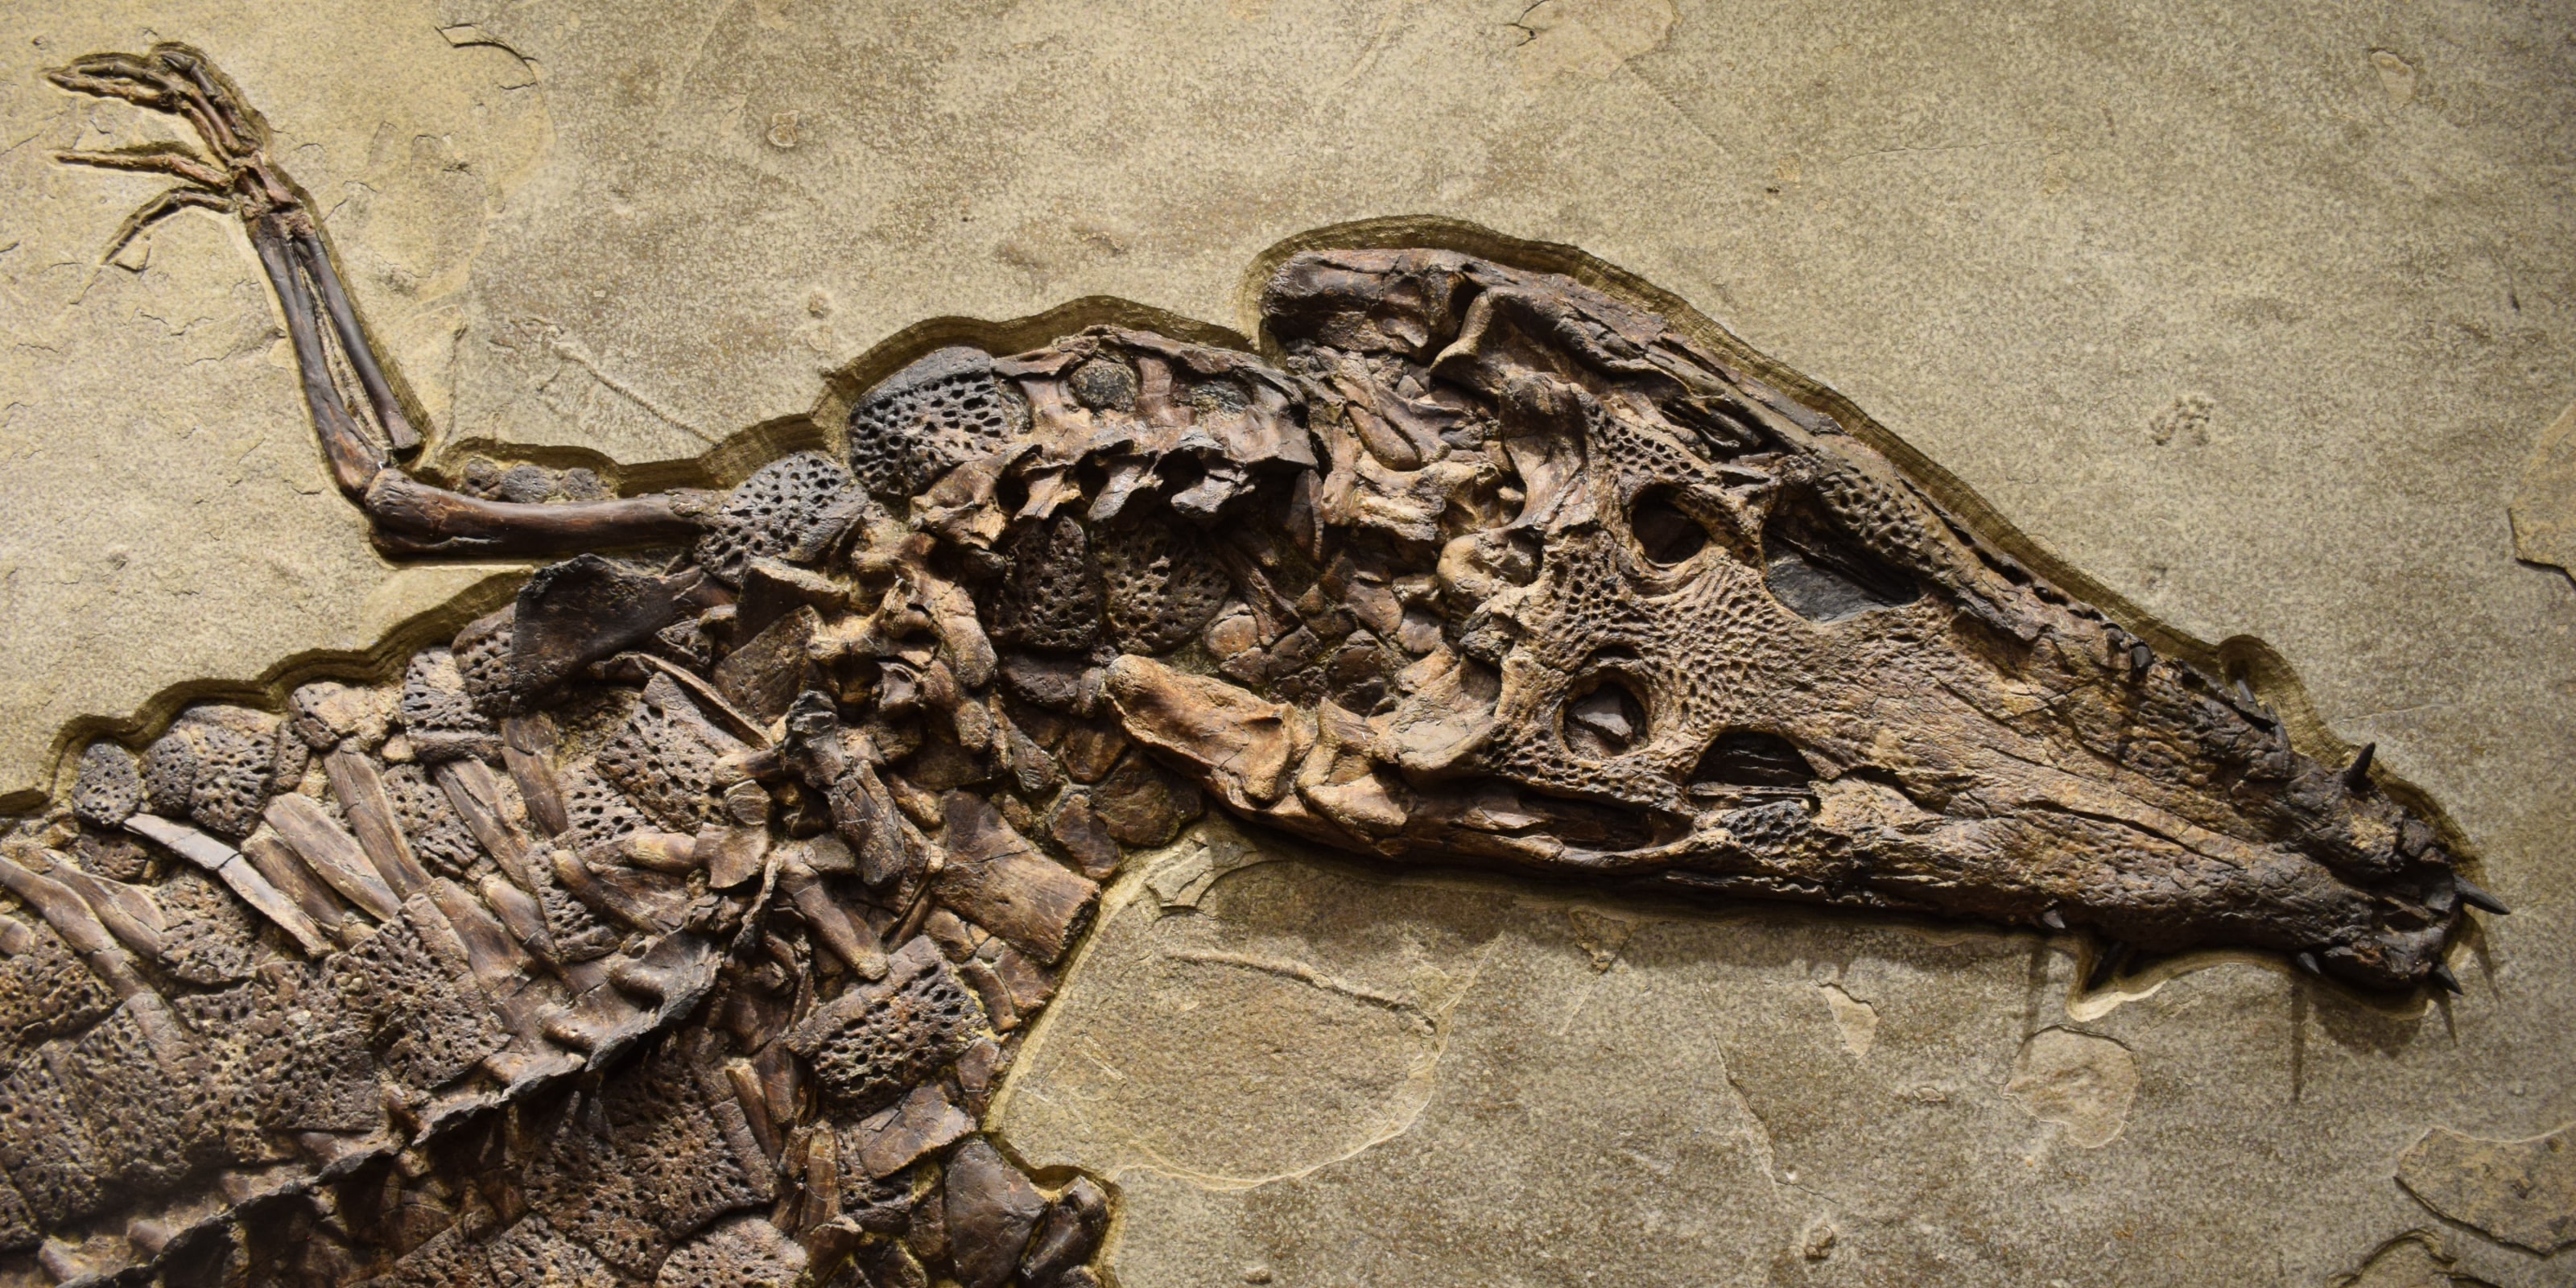 Fossil Crocodile from the Green River Formation